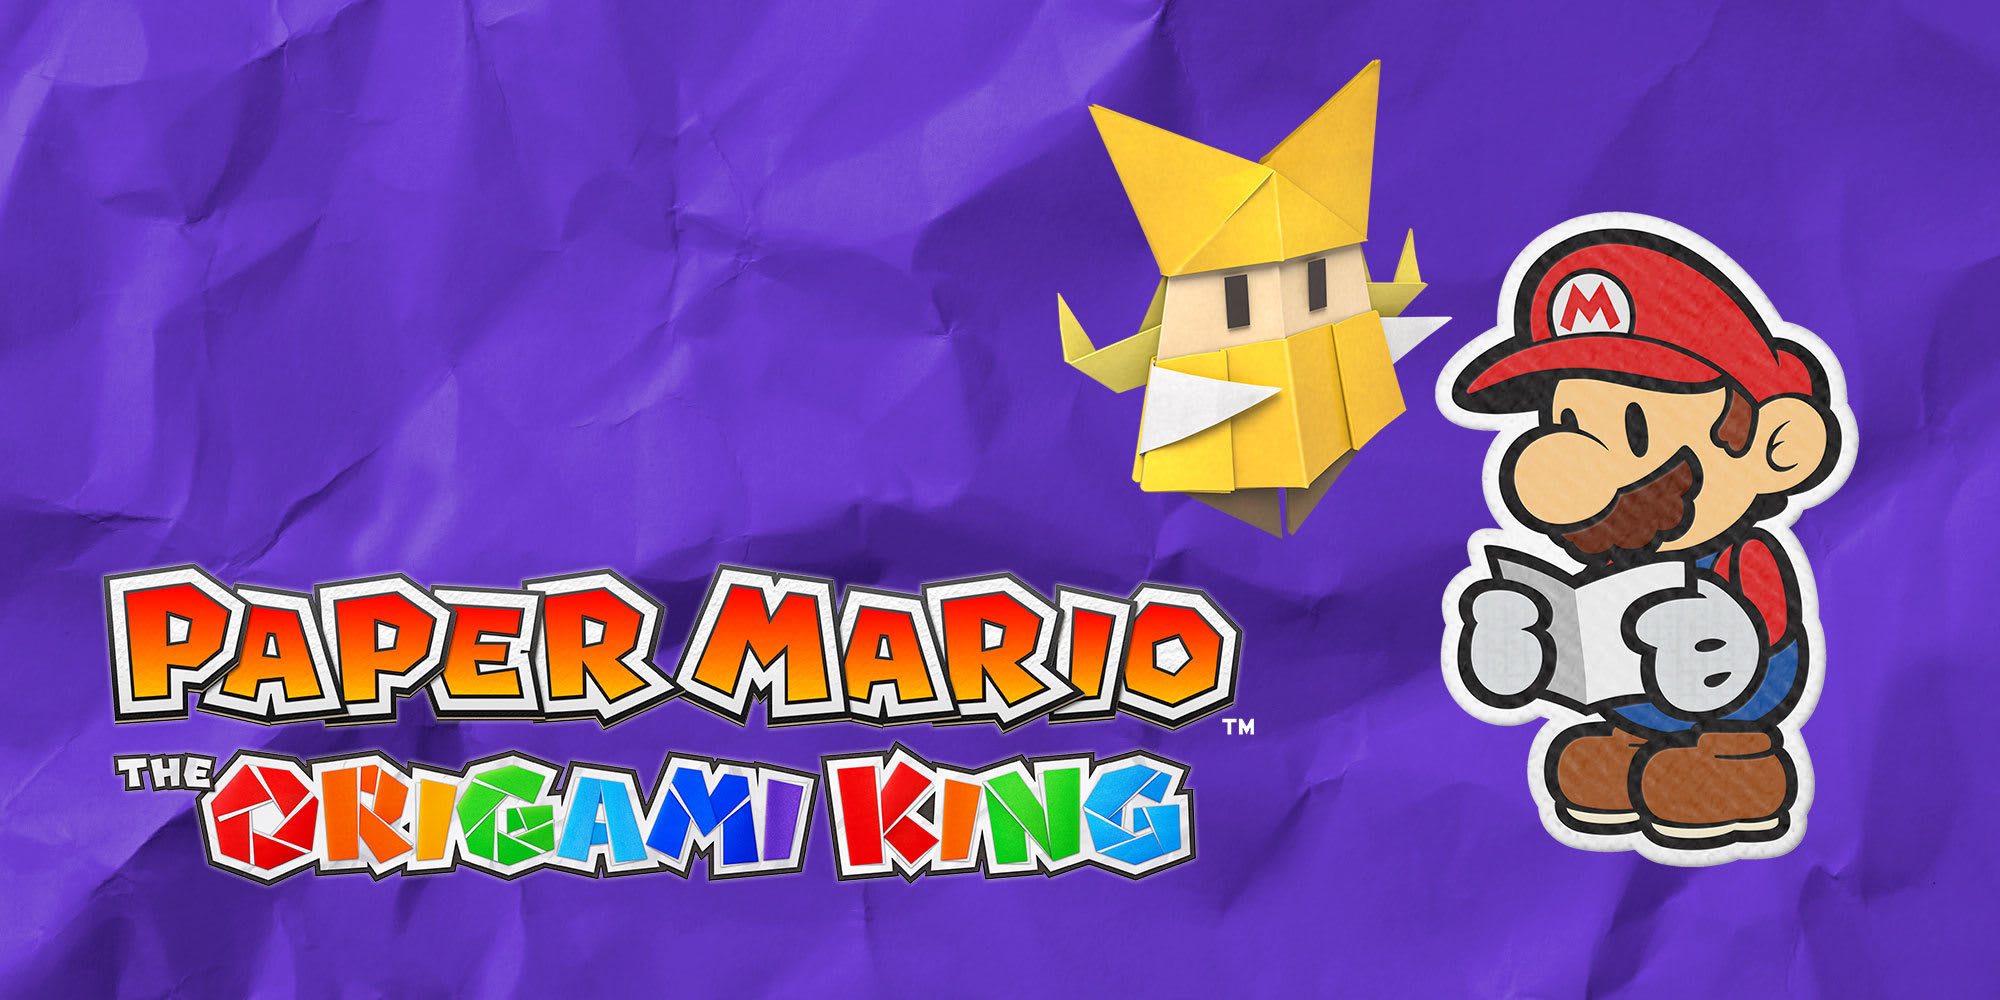 Paper Mario Origami King, 10 Tips Article Image 1